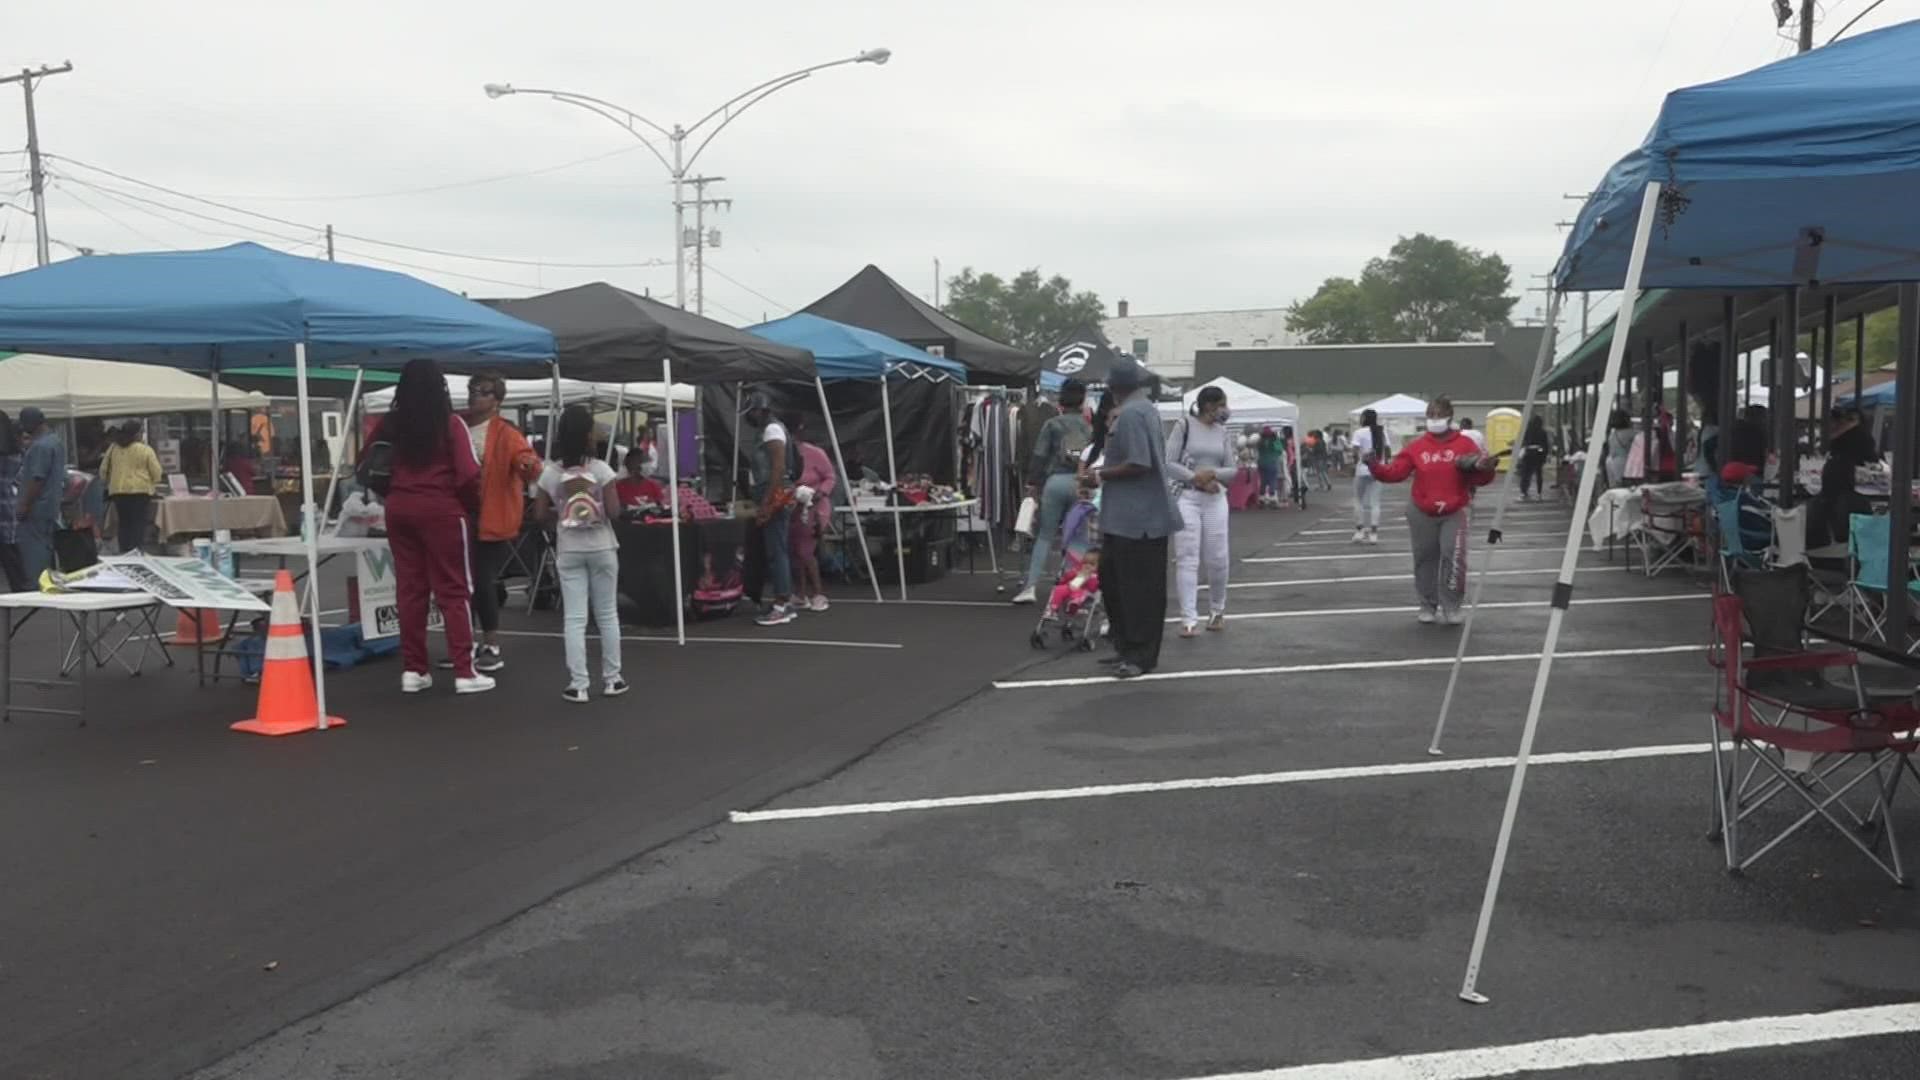 More than 60 vendors filled the city farmers market on Saturday.